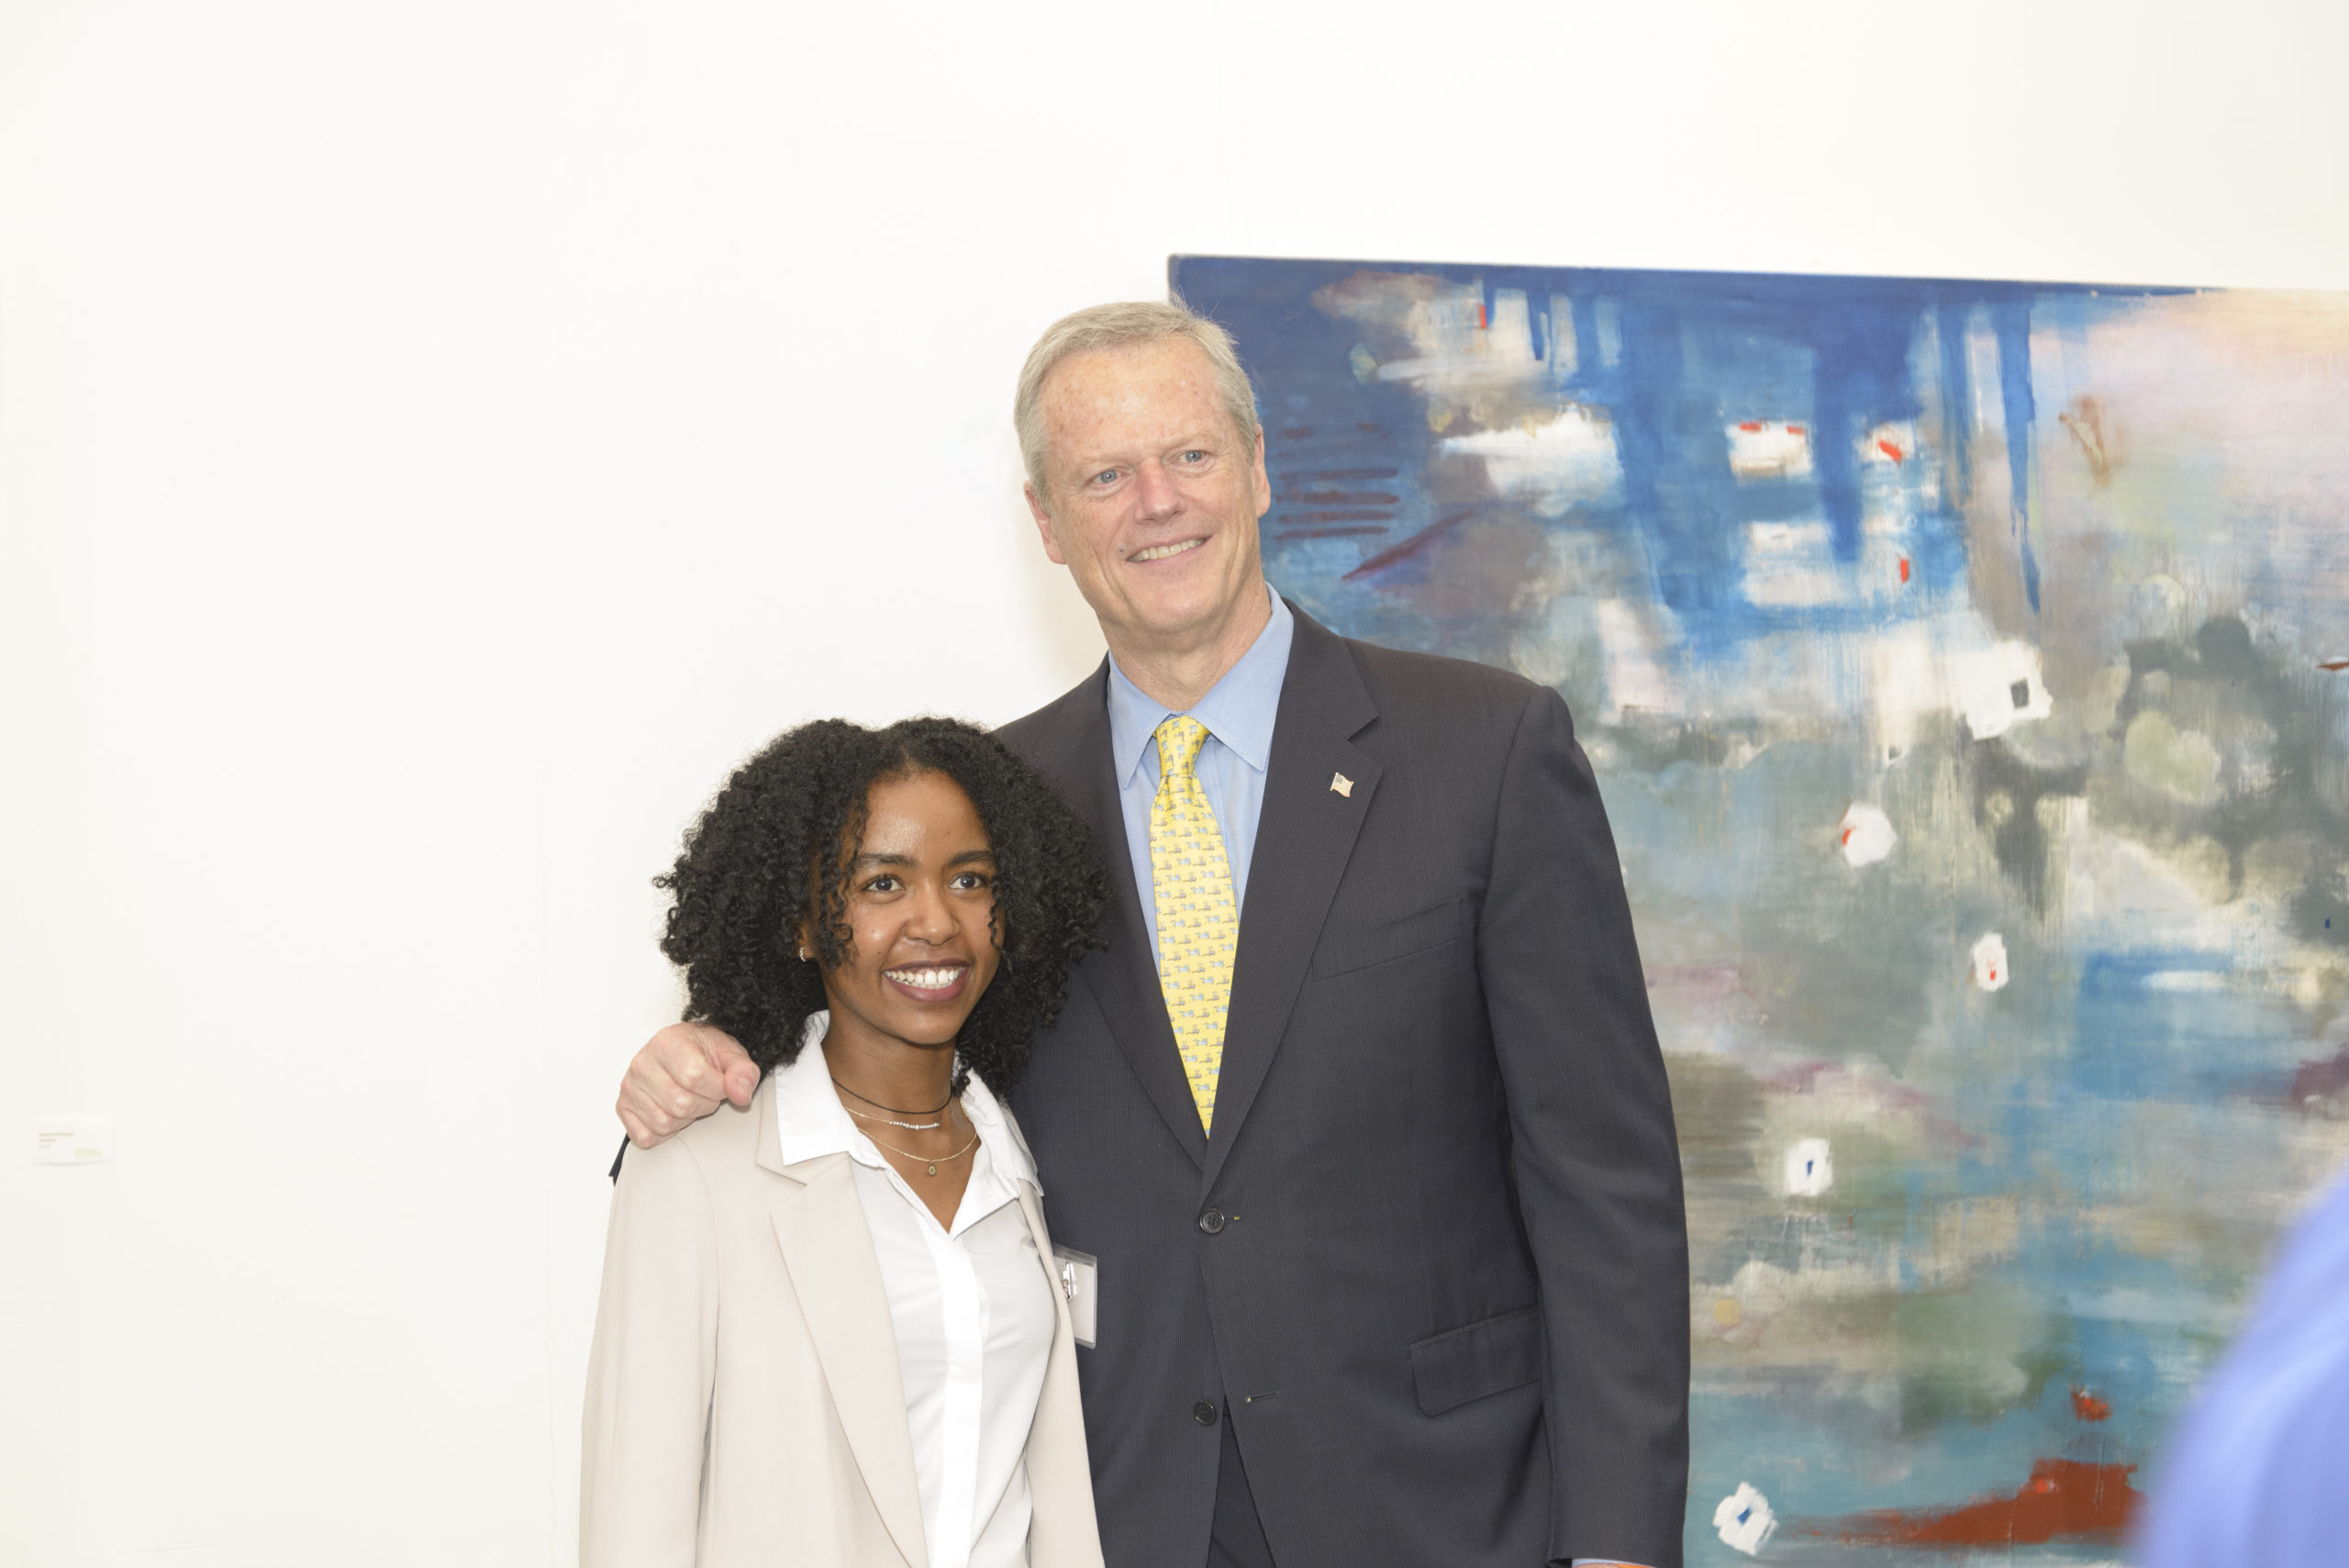 Governor Charlie Baker and ACE alumna Yordy Tesfaye